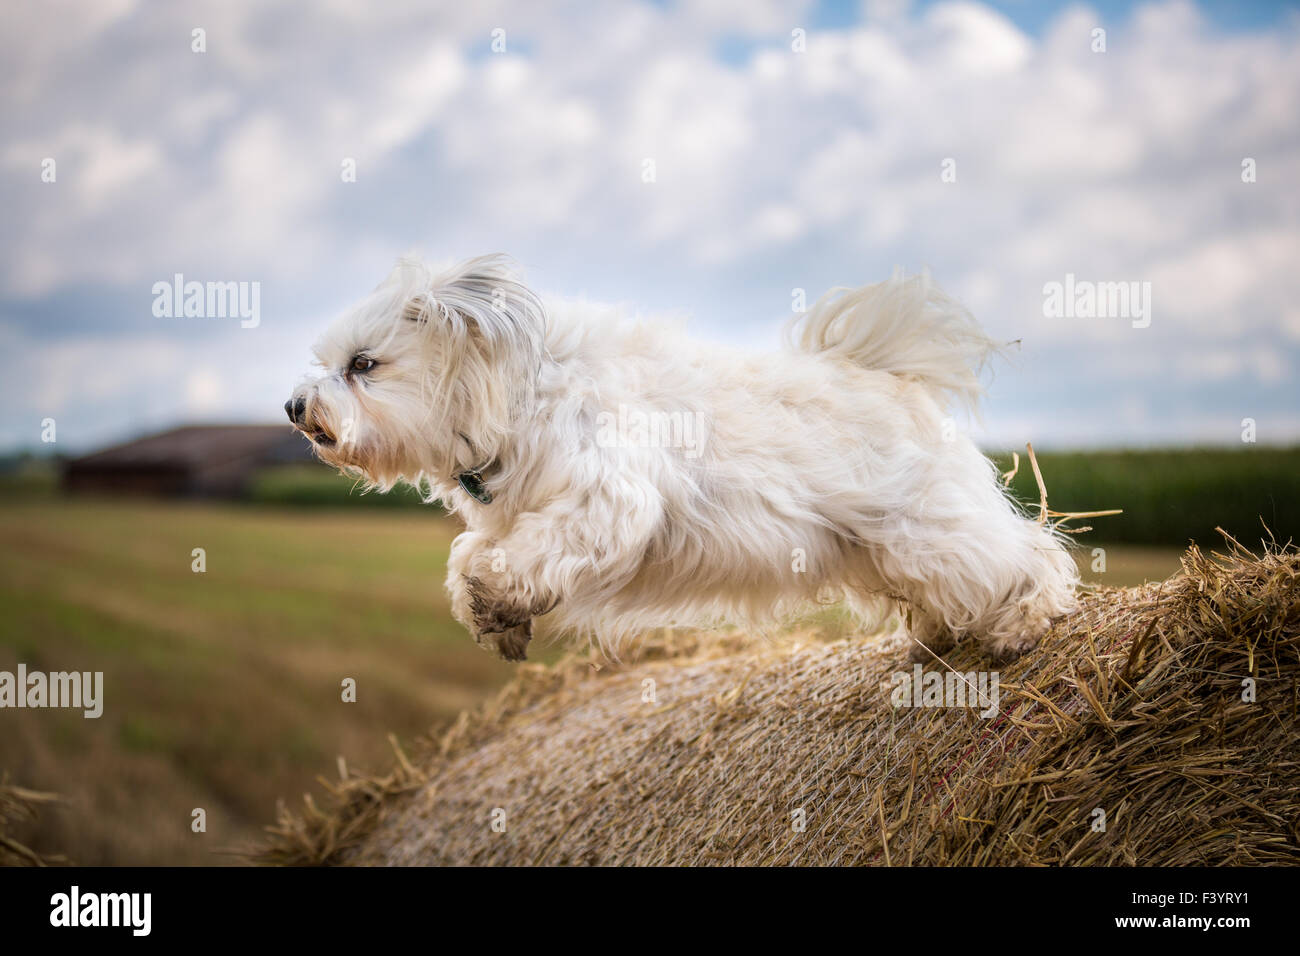 Dog when jumping Stock Photo